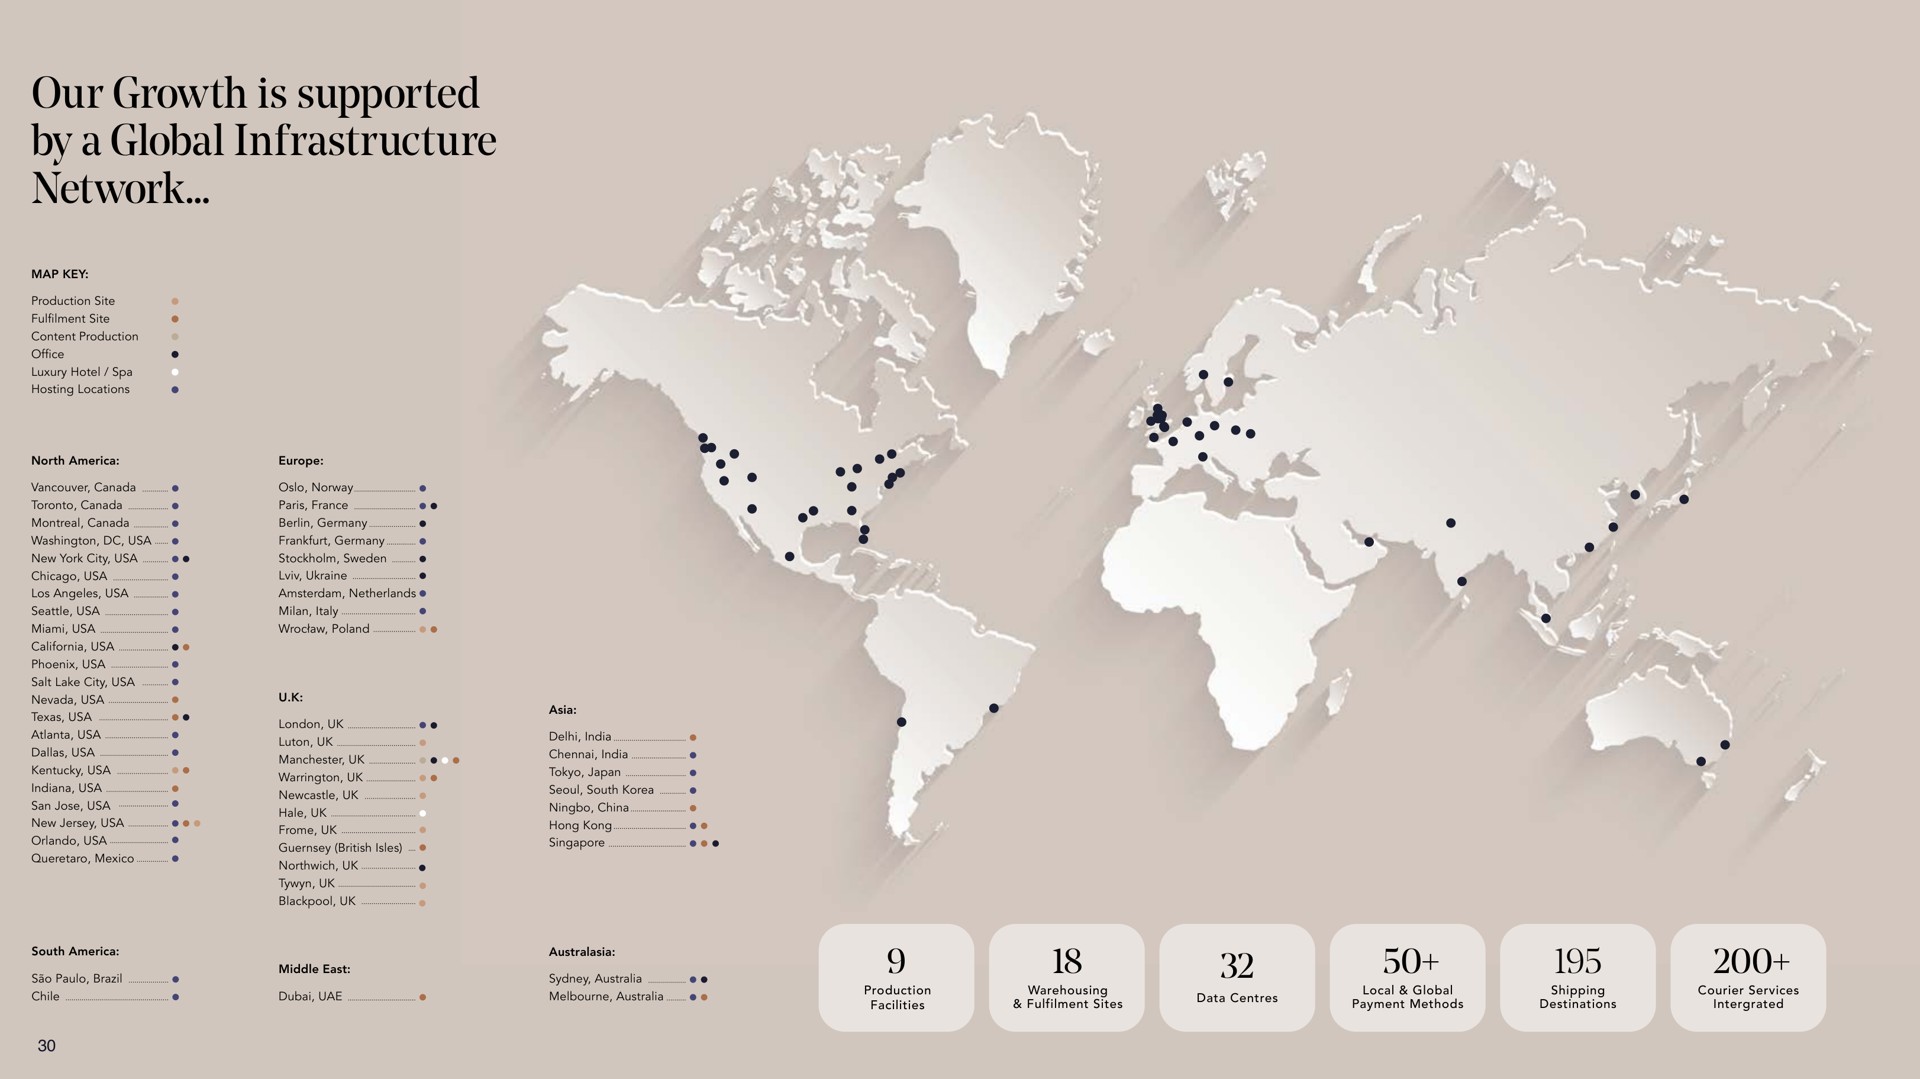 our growth is supported by a global infrastructure network | The Hut Group